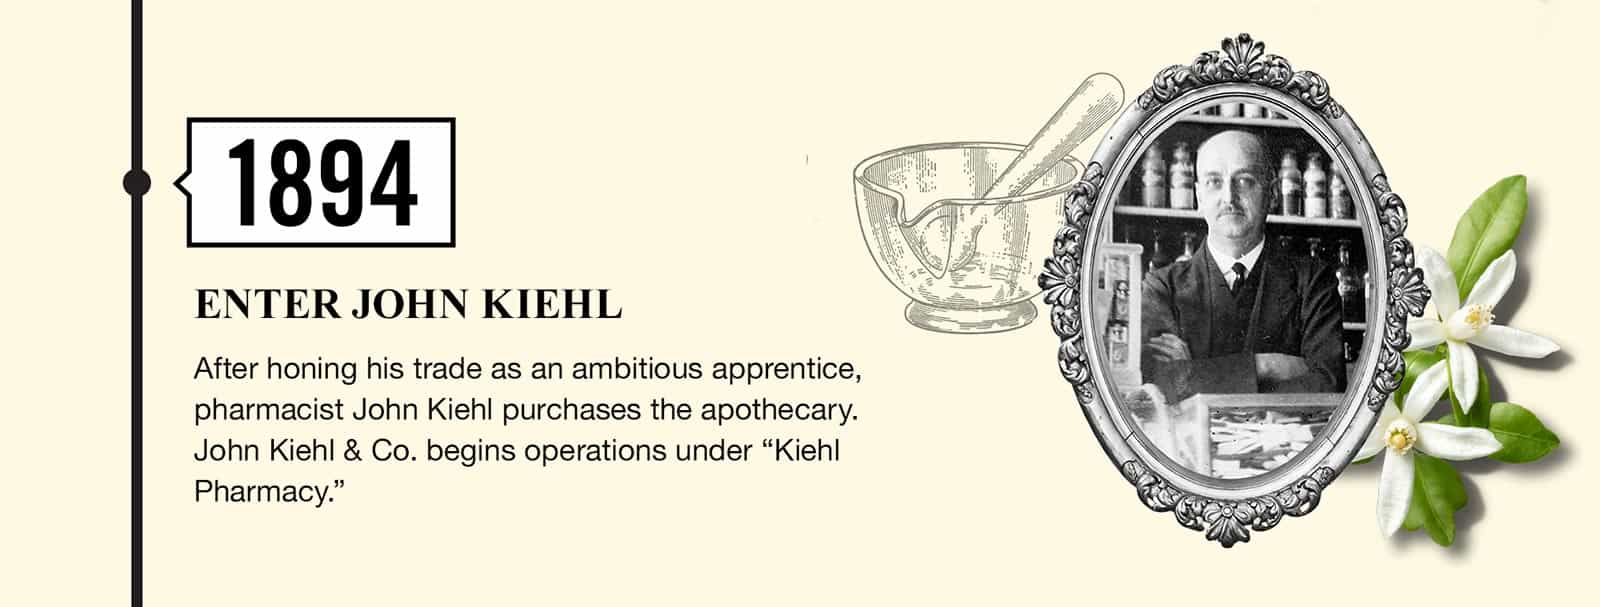 Kiehl's history in the year 1894